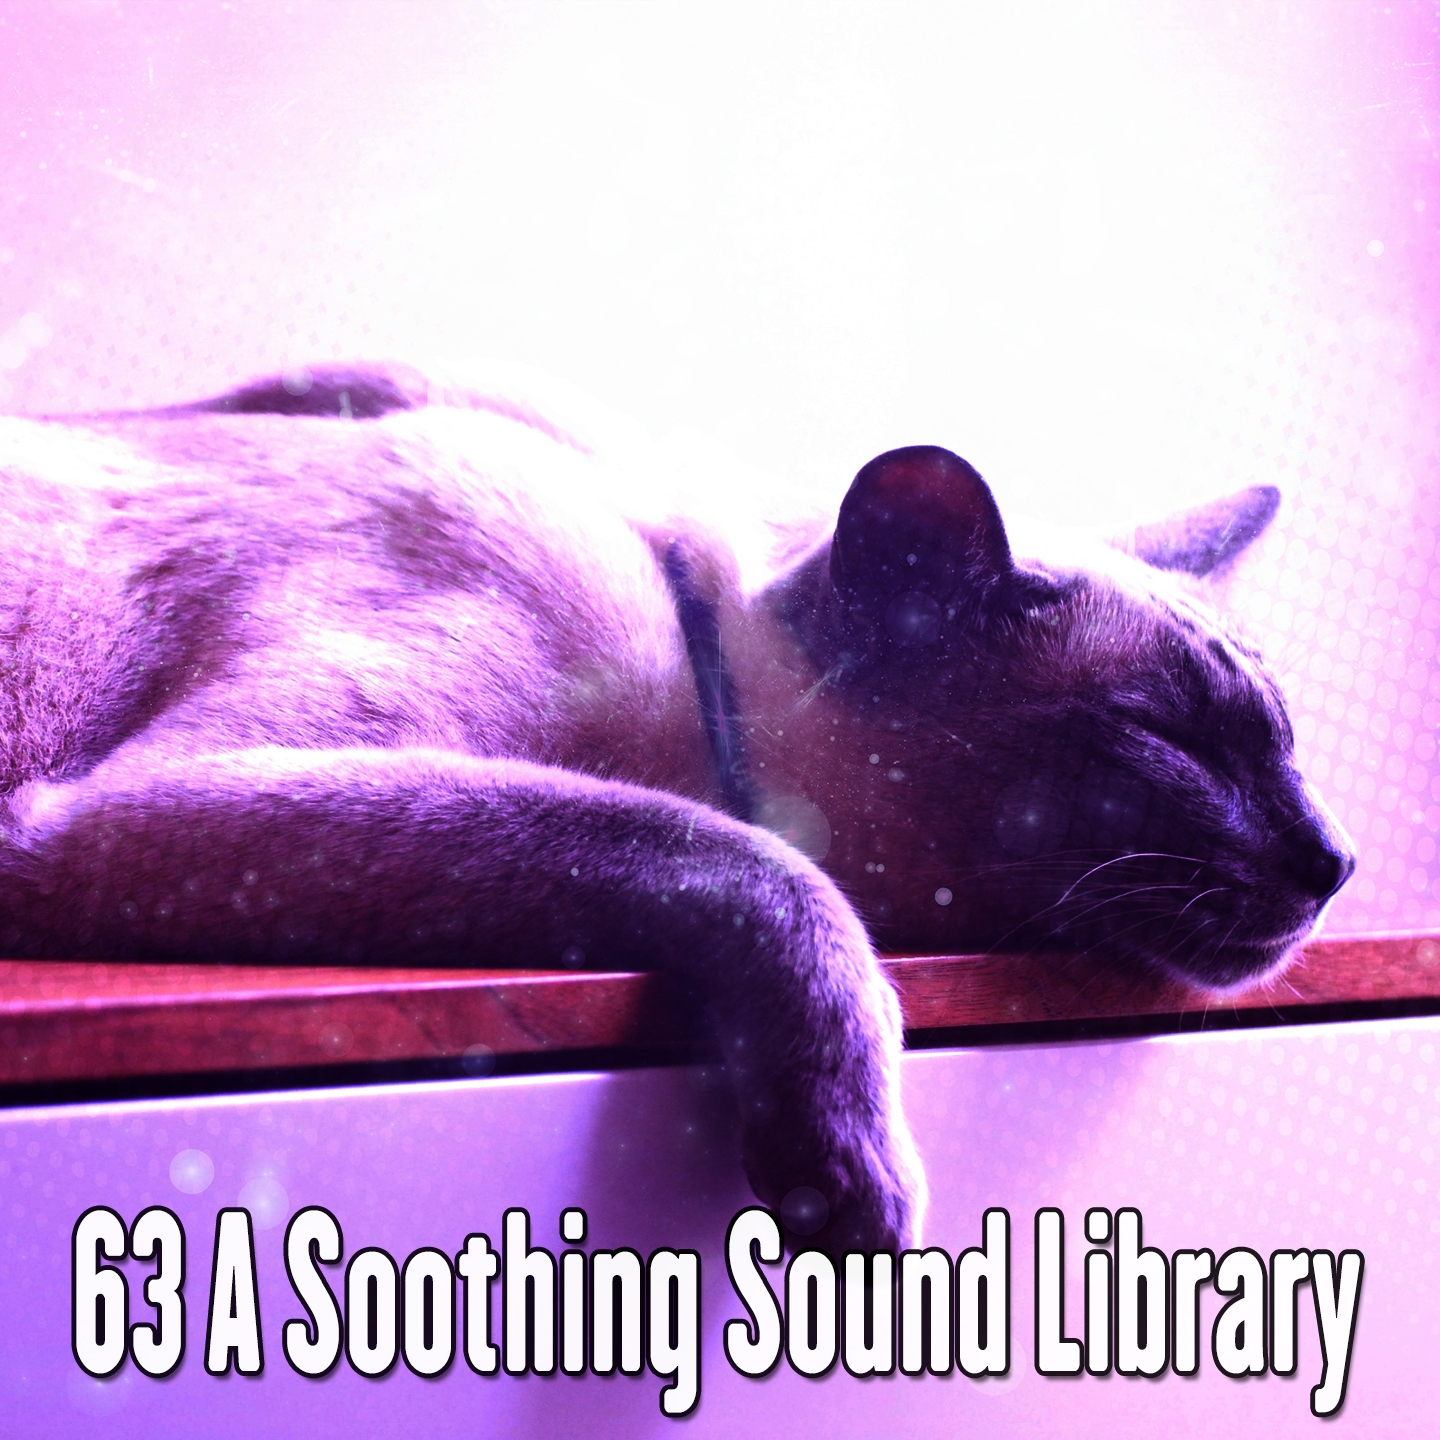 63 A Soothing Sound Library